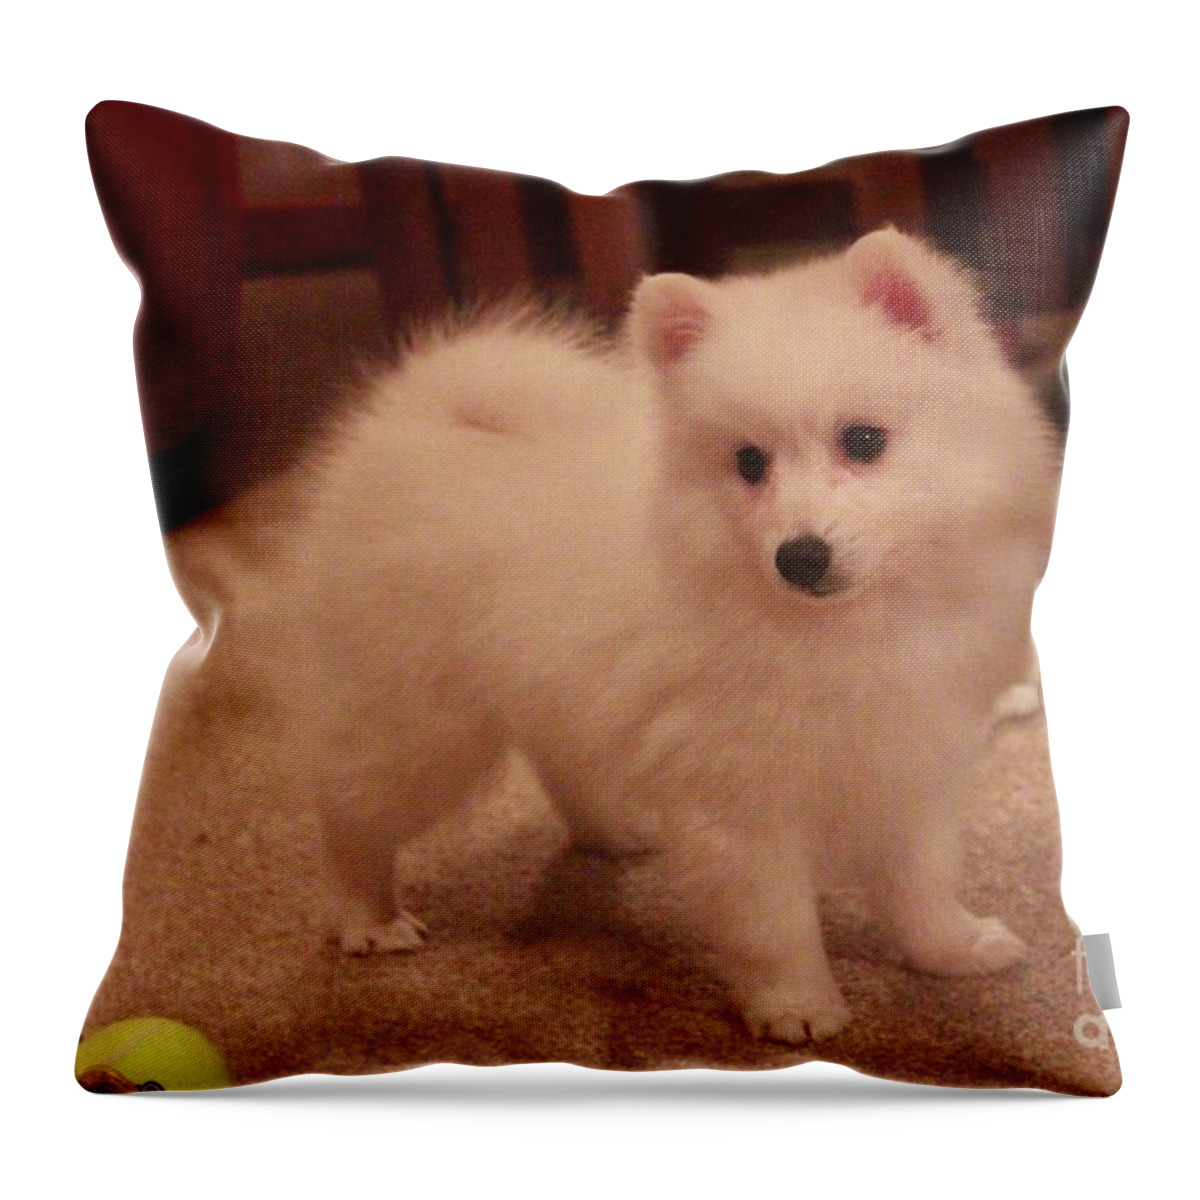 Dog Throw Pillow featuring the photograph Daisy - Japanese Spitz by David Grant